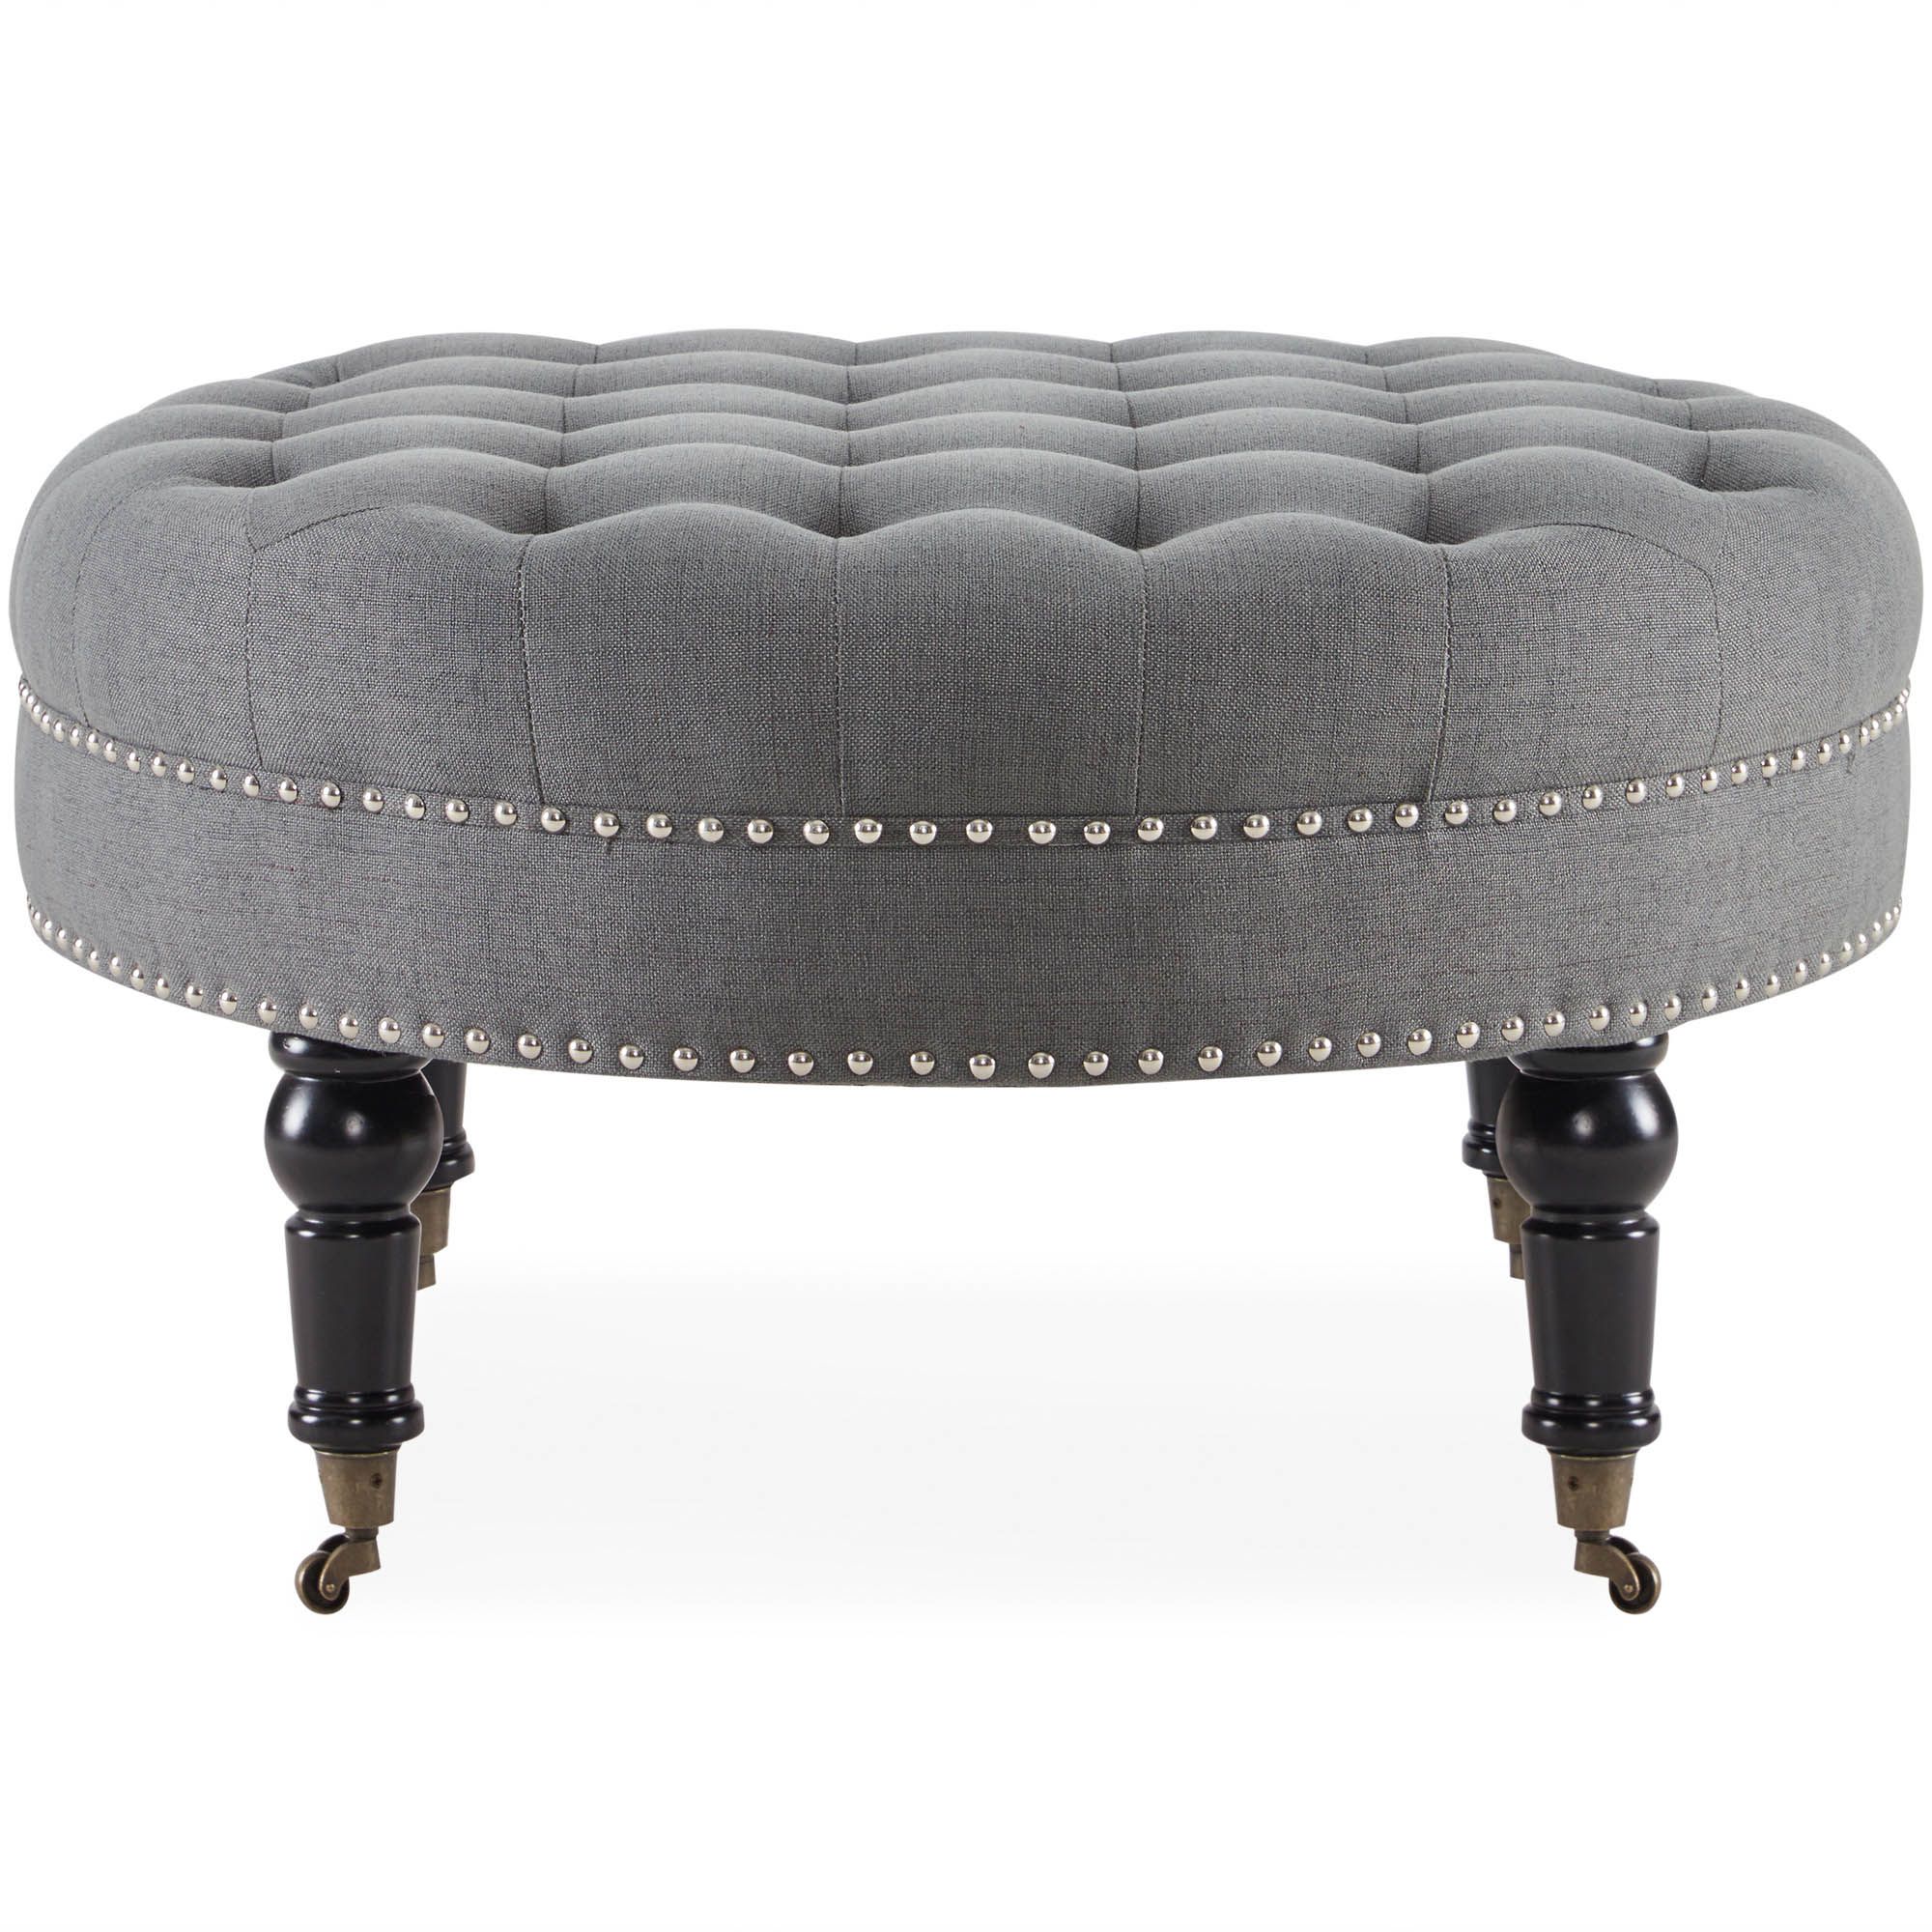 Round Ottoman Large Tufted Upholstery Bedroom With Caster Wheel, Gray For Round Beige Faux Leather Ottomans With Pull Tab (View 10 of 20)